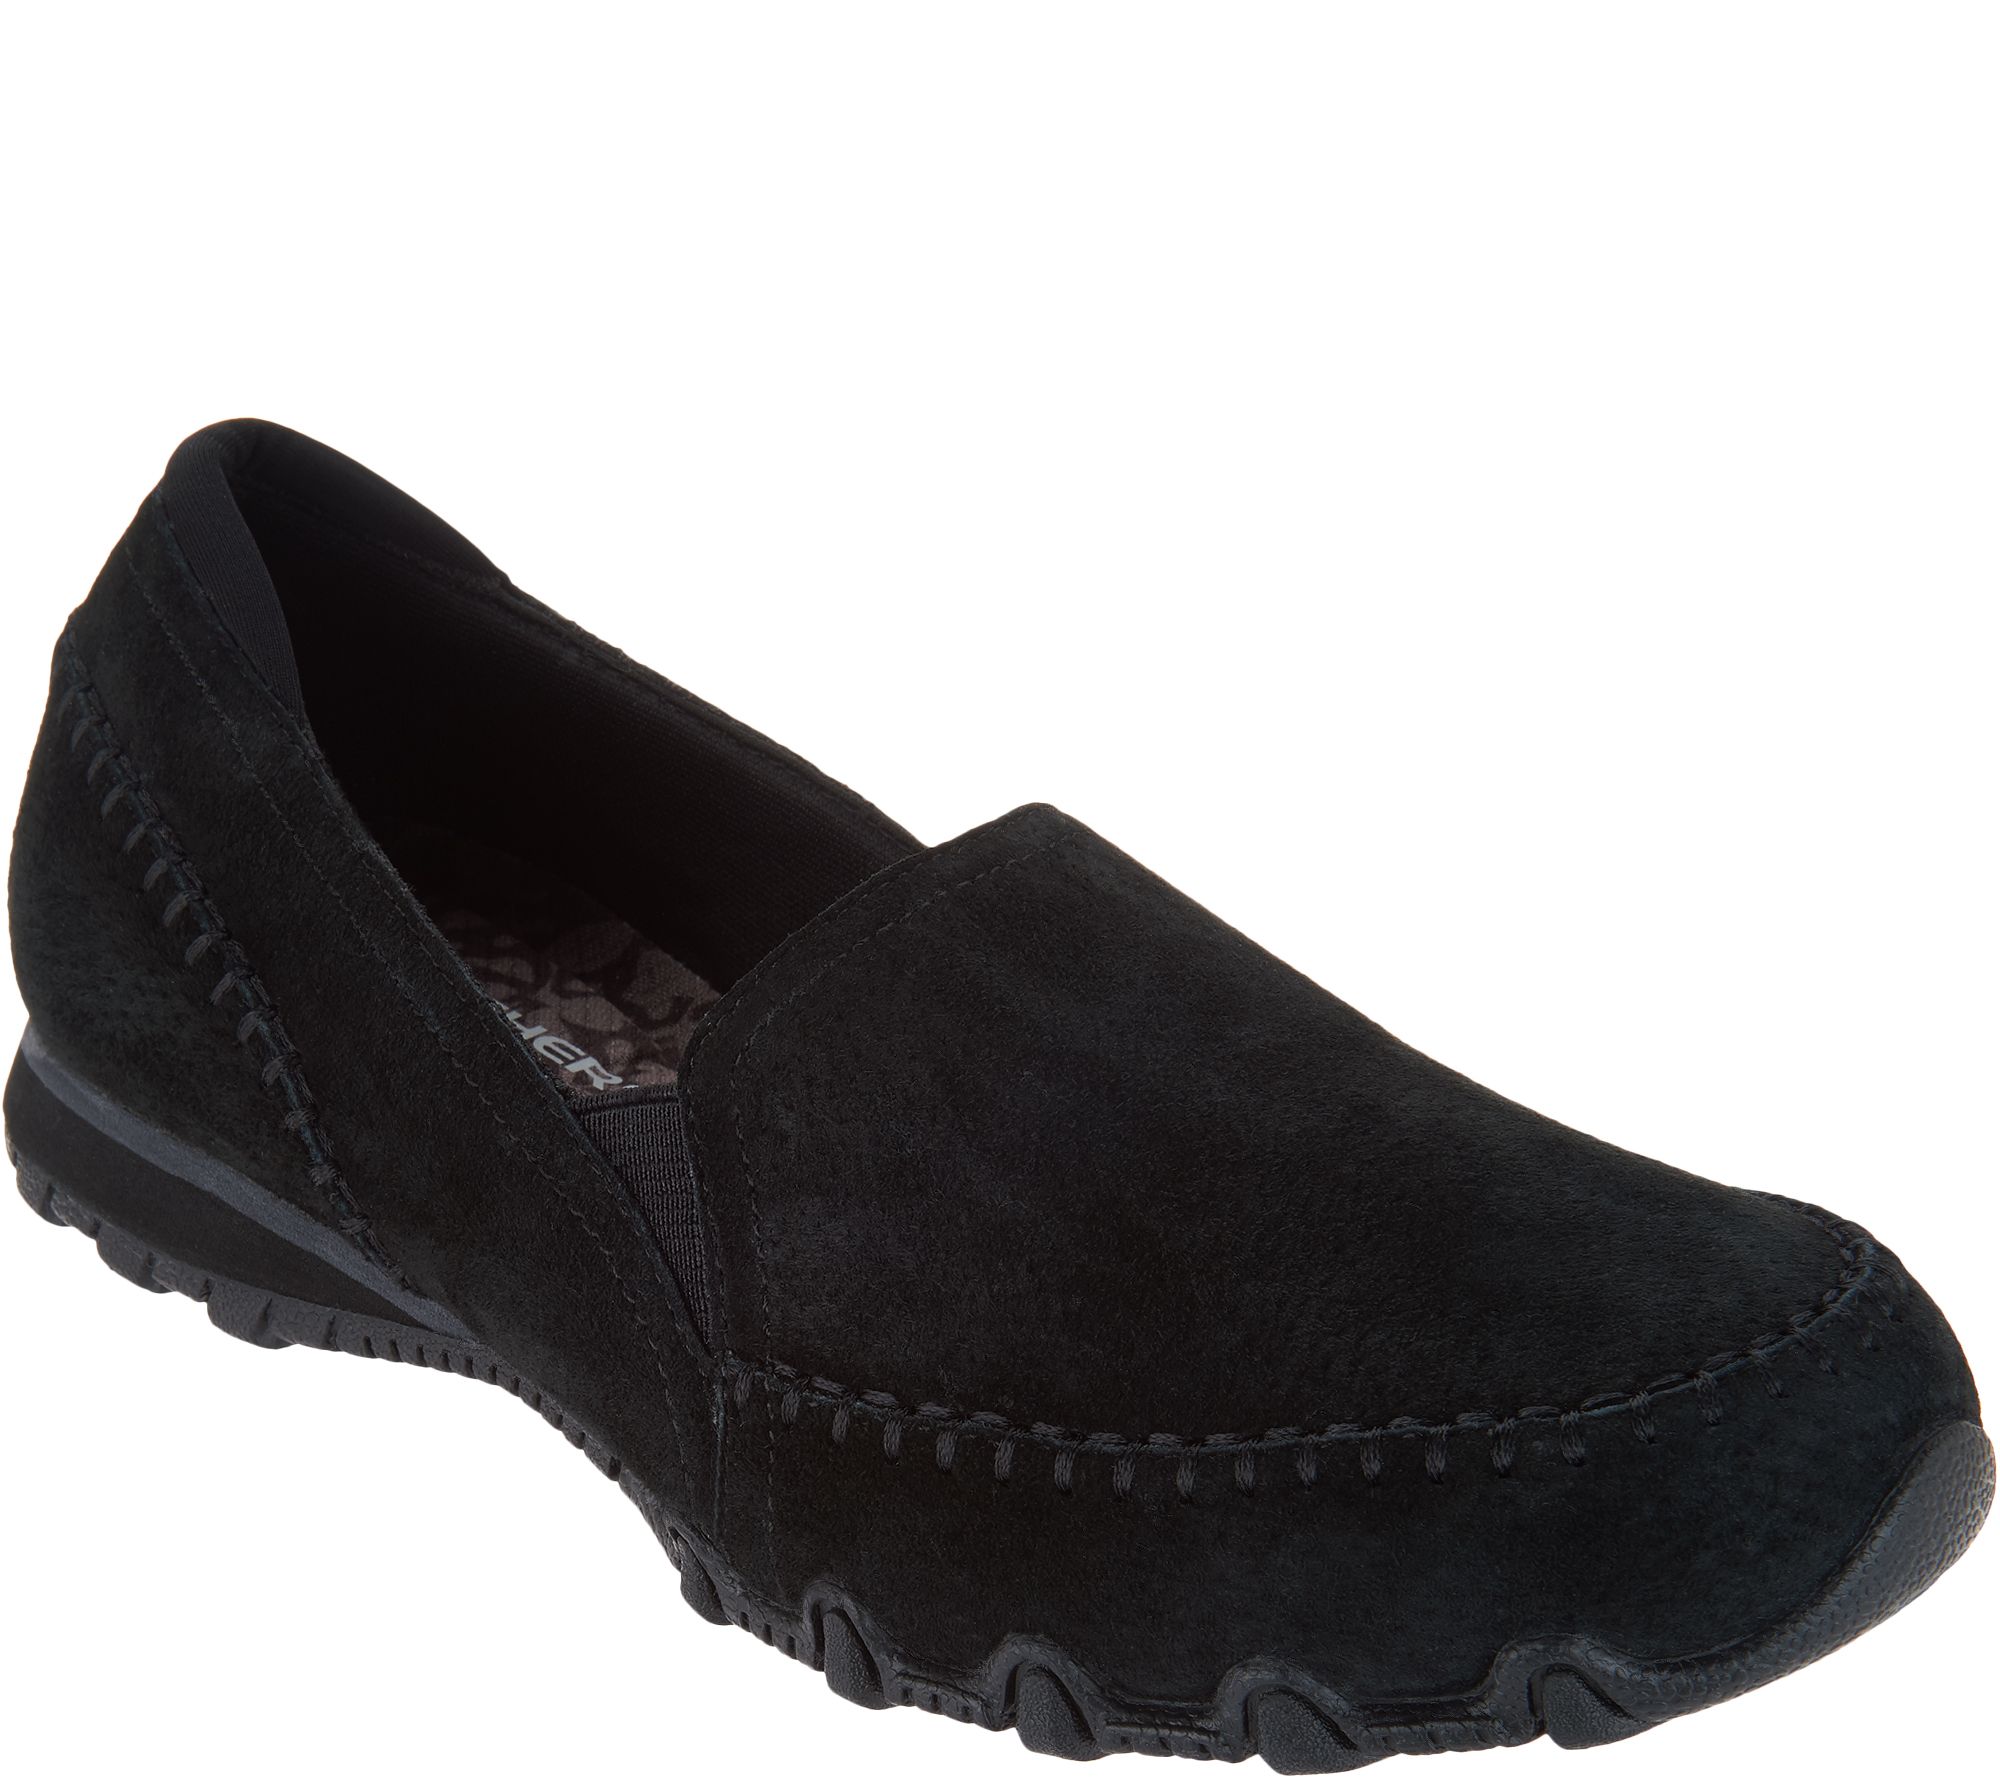 Skechers Relaxed Fit Suede Slip-On 